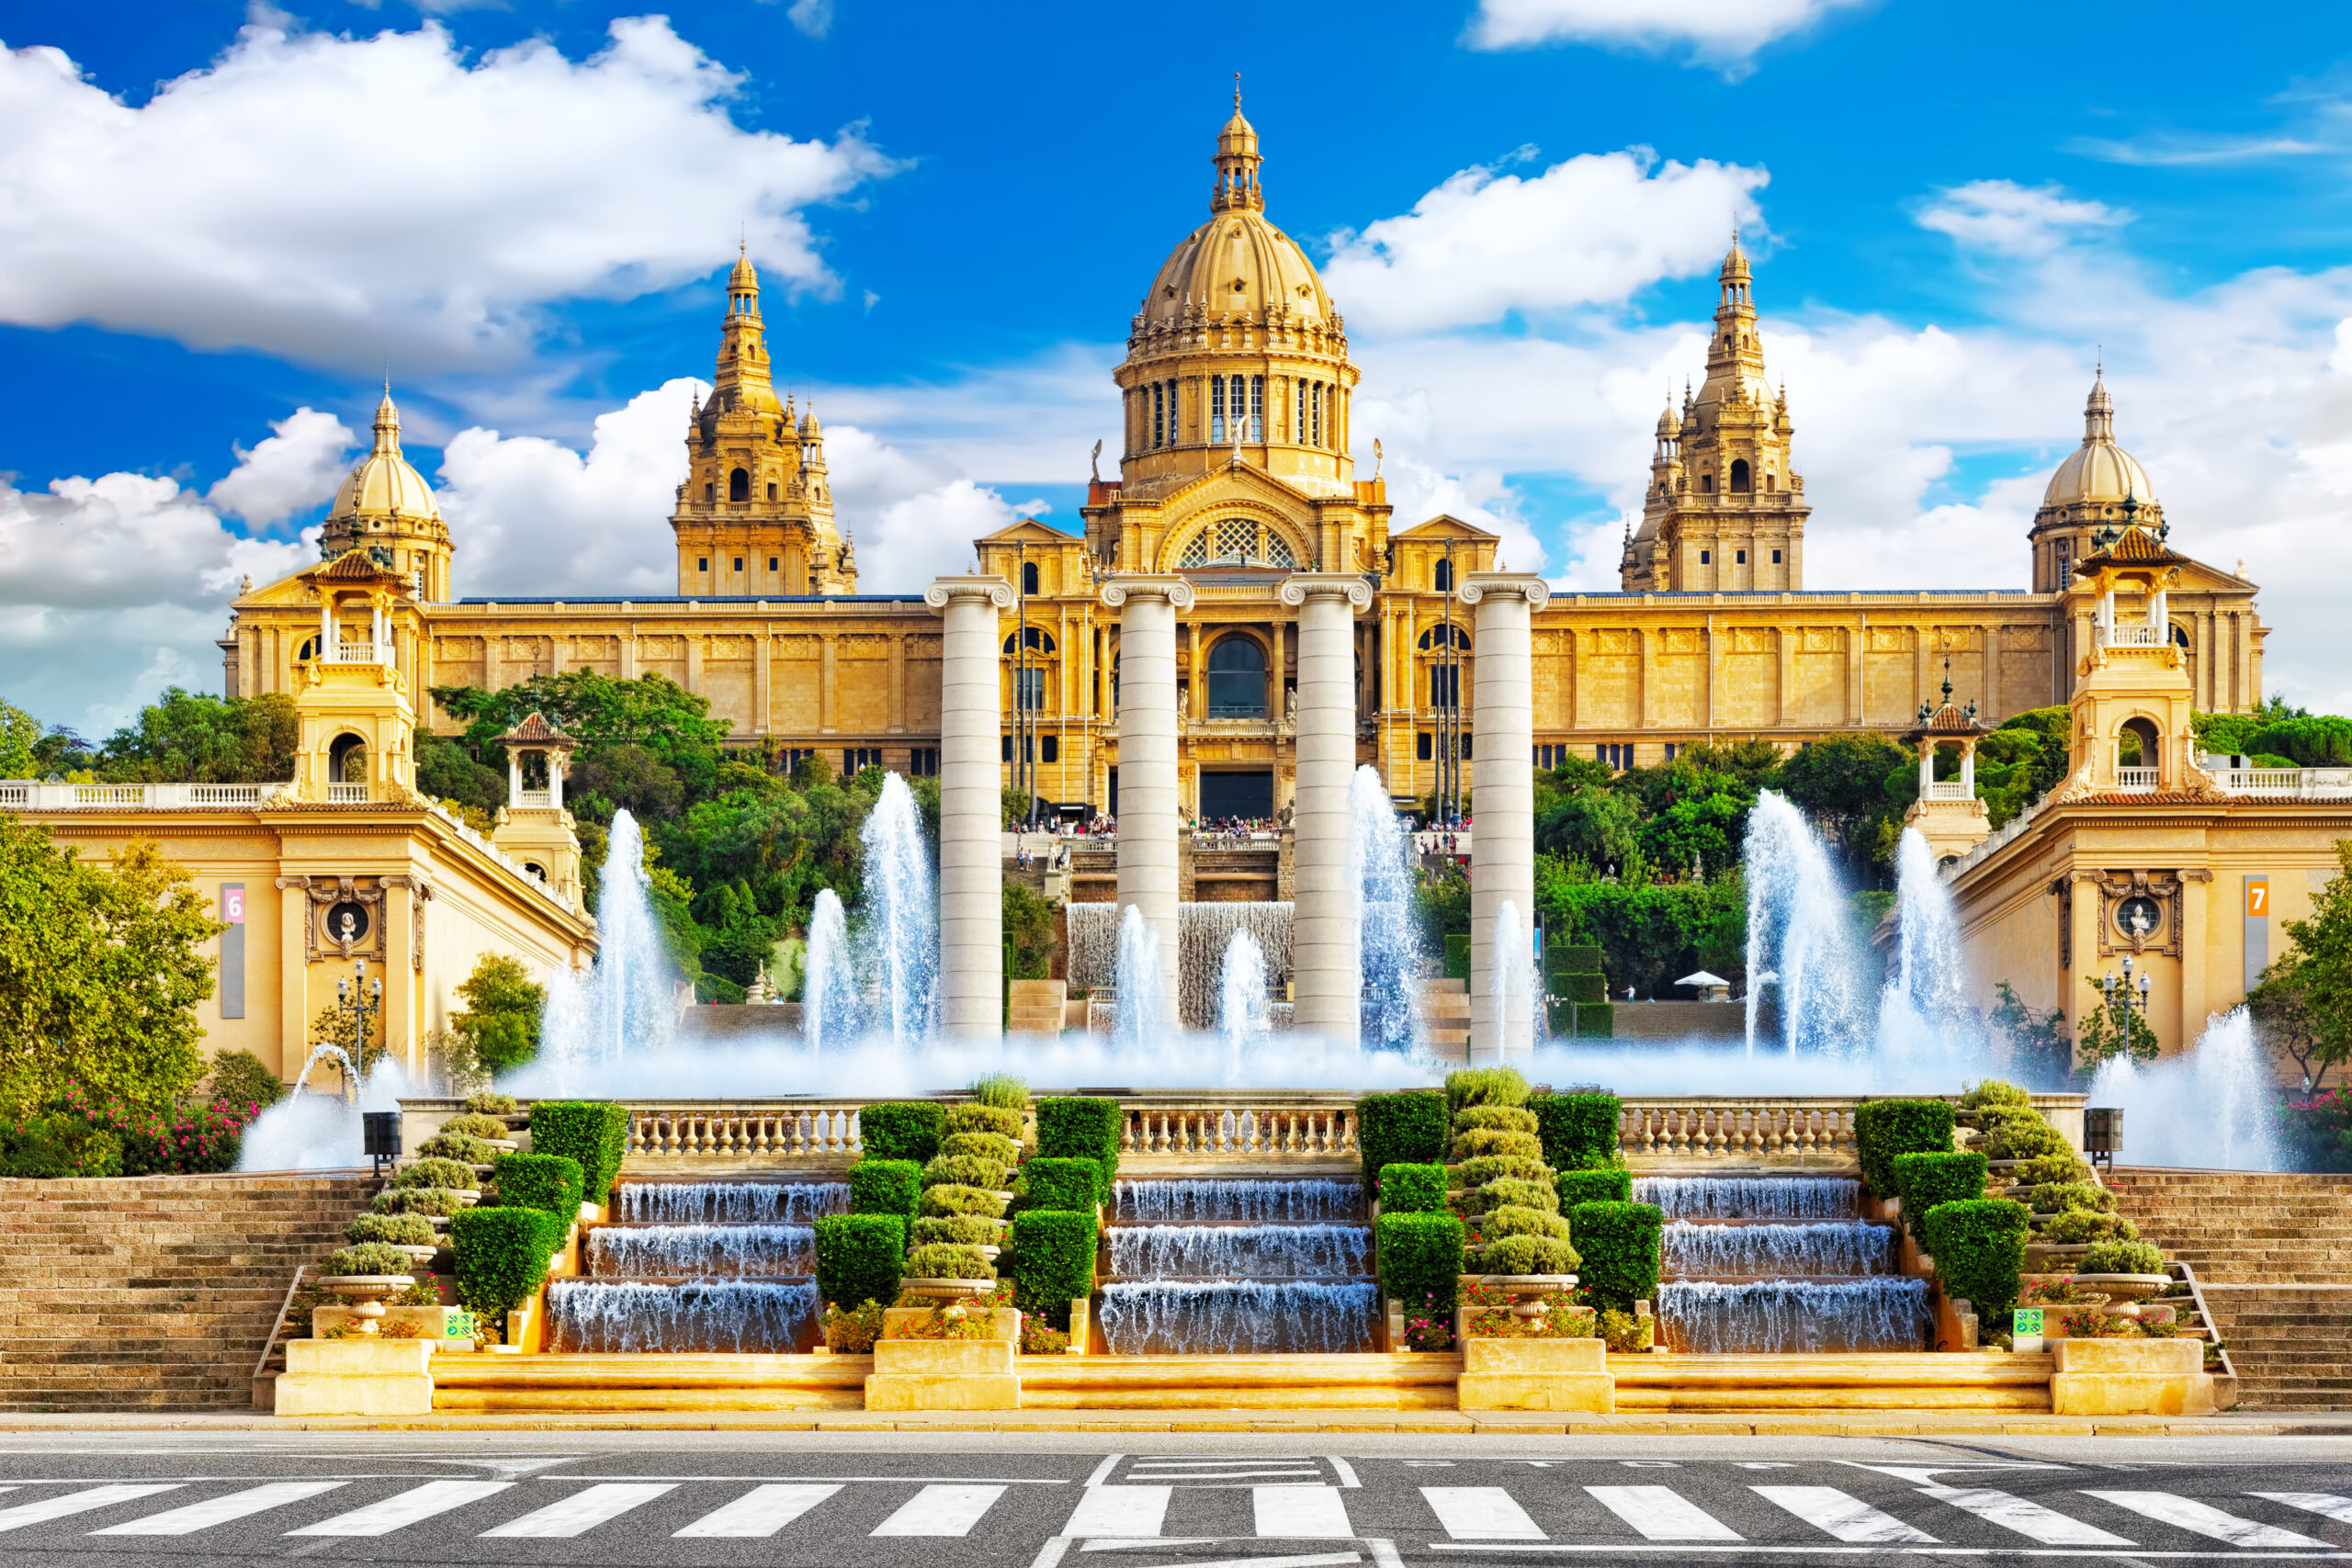 <p>Roundtrip flights from the USA to Barcelona cost just $419. Once there, you can easily find cheap places to stay. Look for three-star hotels or check out Airbnb for options. You can rent a home or apartment for $100 a night or a shared room for $35. Enjoy exploring the culture, art, architecture, and cuisine without worrying about breaking the bank.</p>